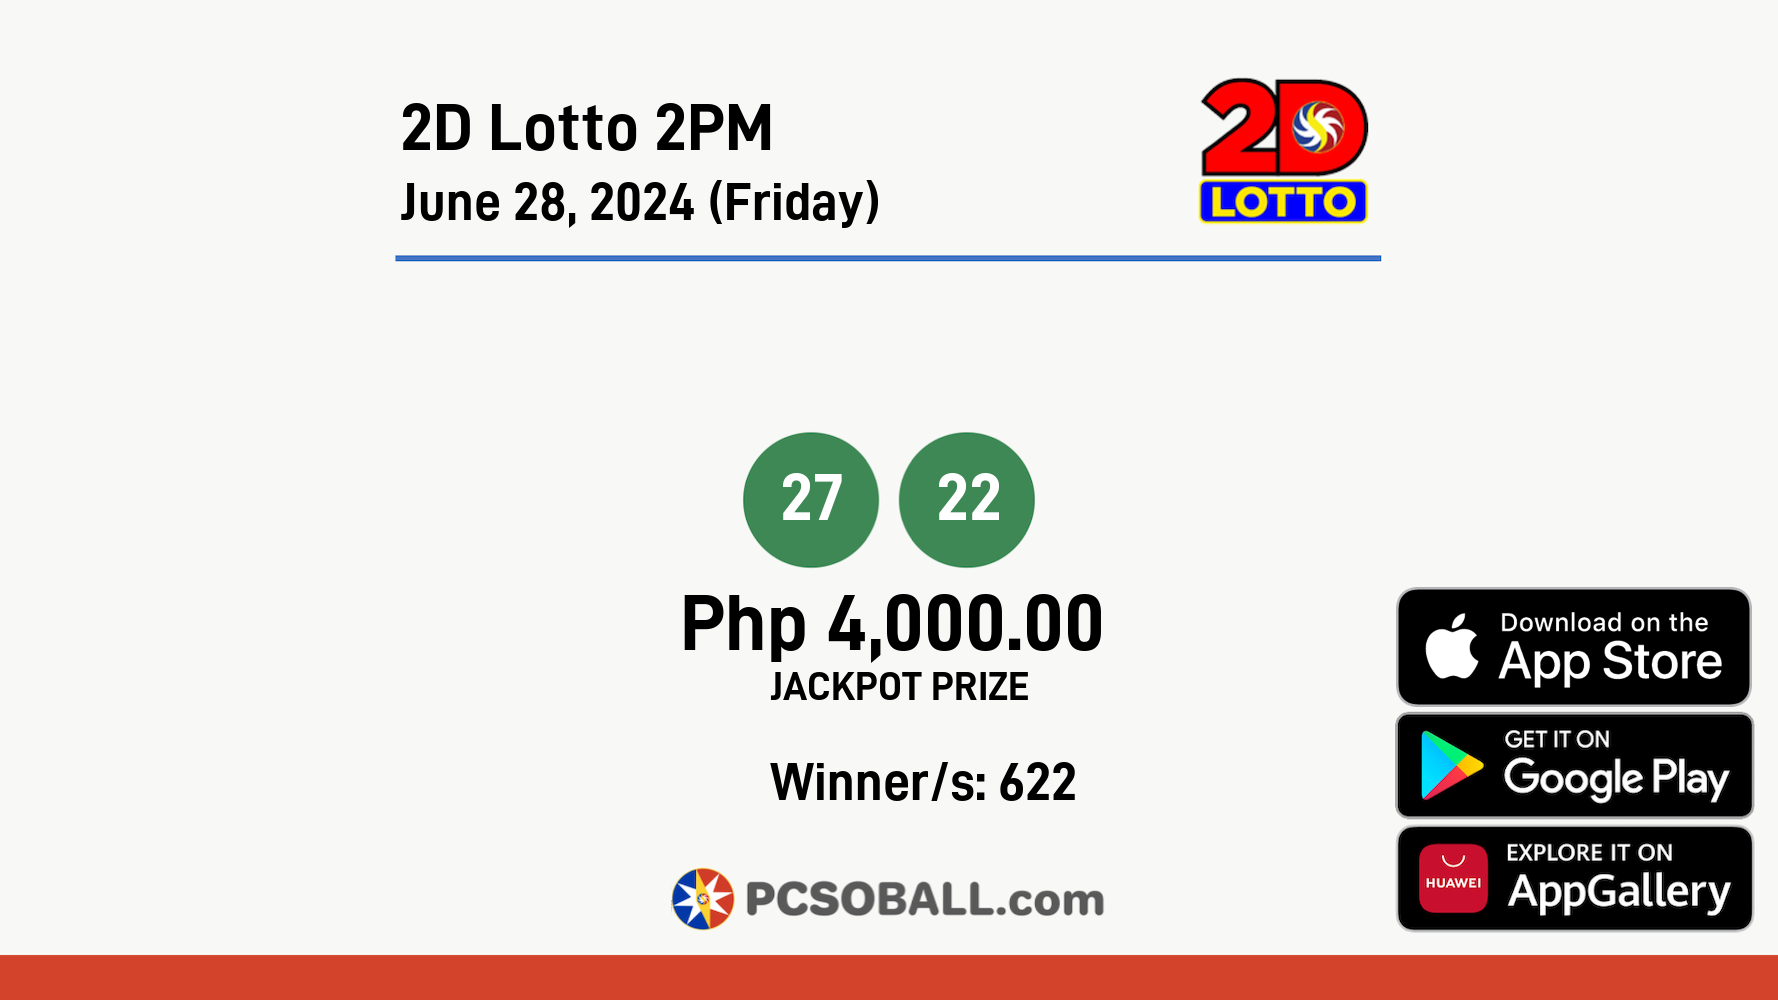 2D Lotto 2PM June 28, 2024 (Friday) Result